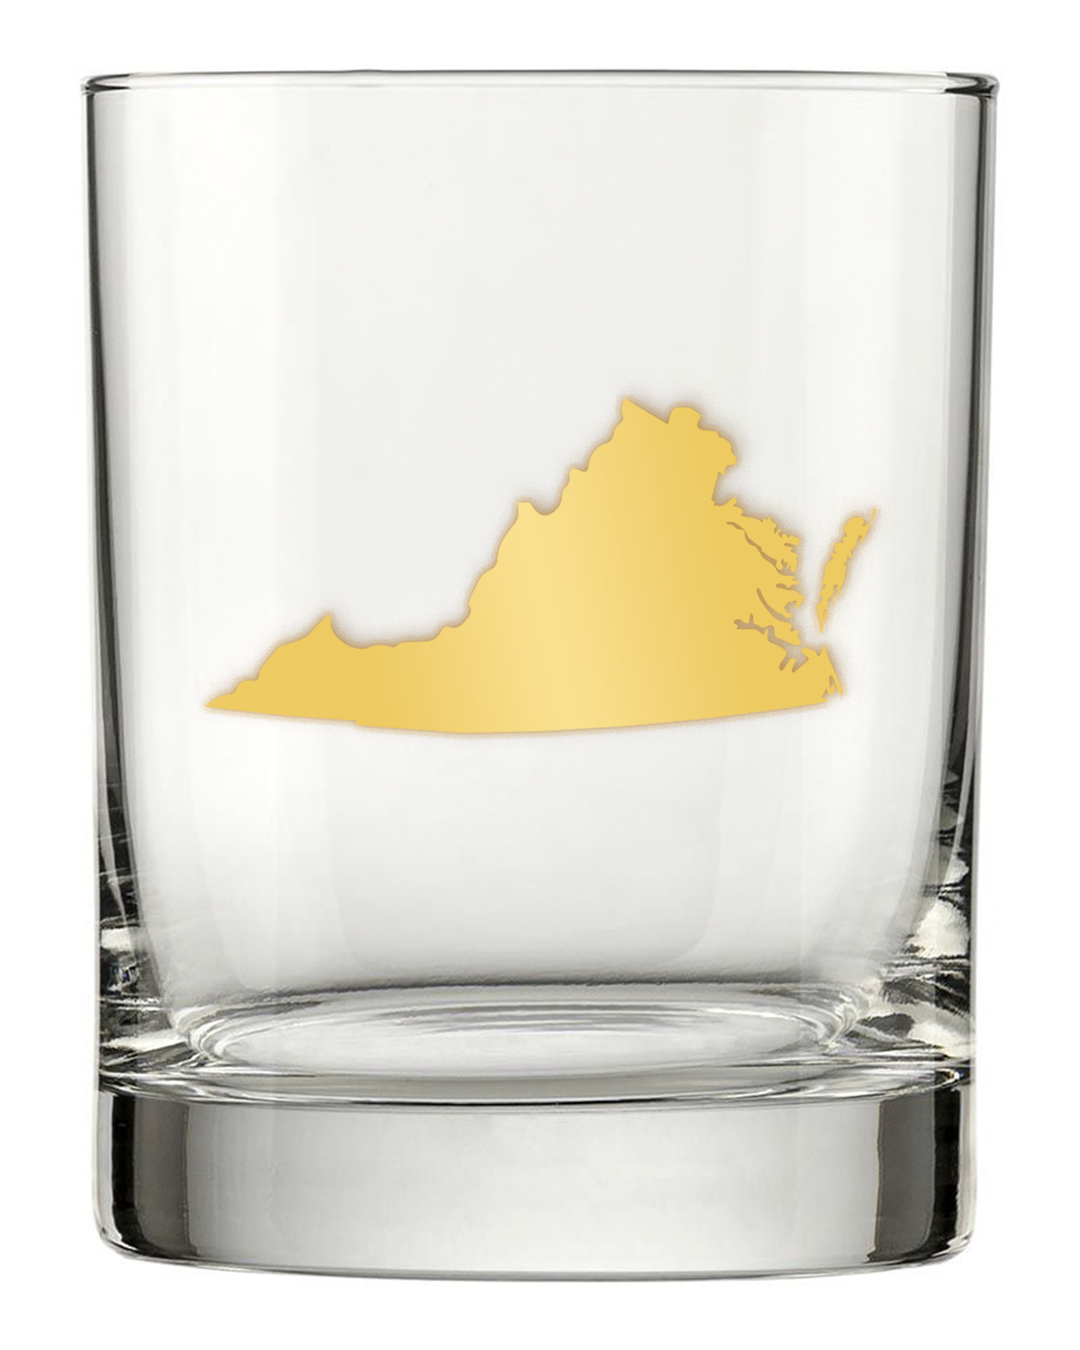 13.5oz Old Fashioned Rocks Glass with the state of Virginia silhouetted in 22k gold foil on the face. Drinking Glass